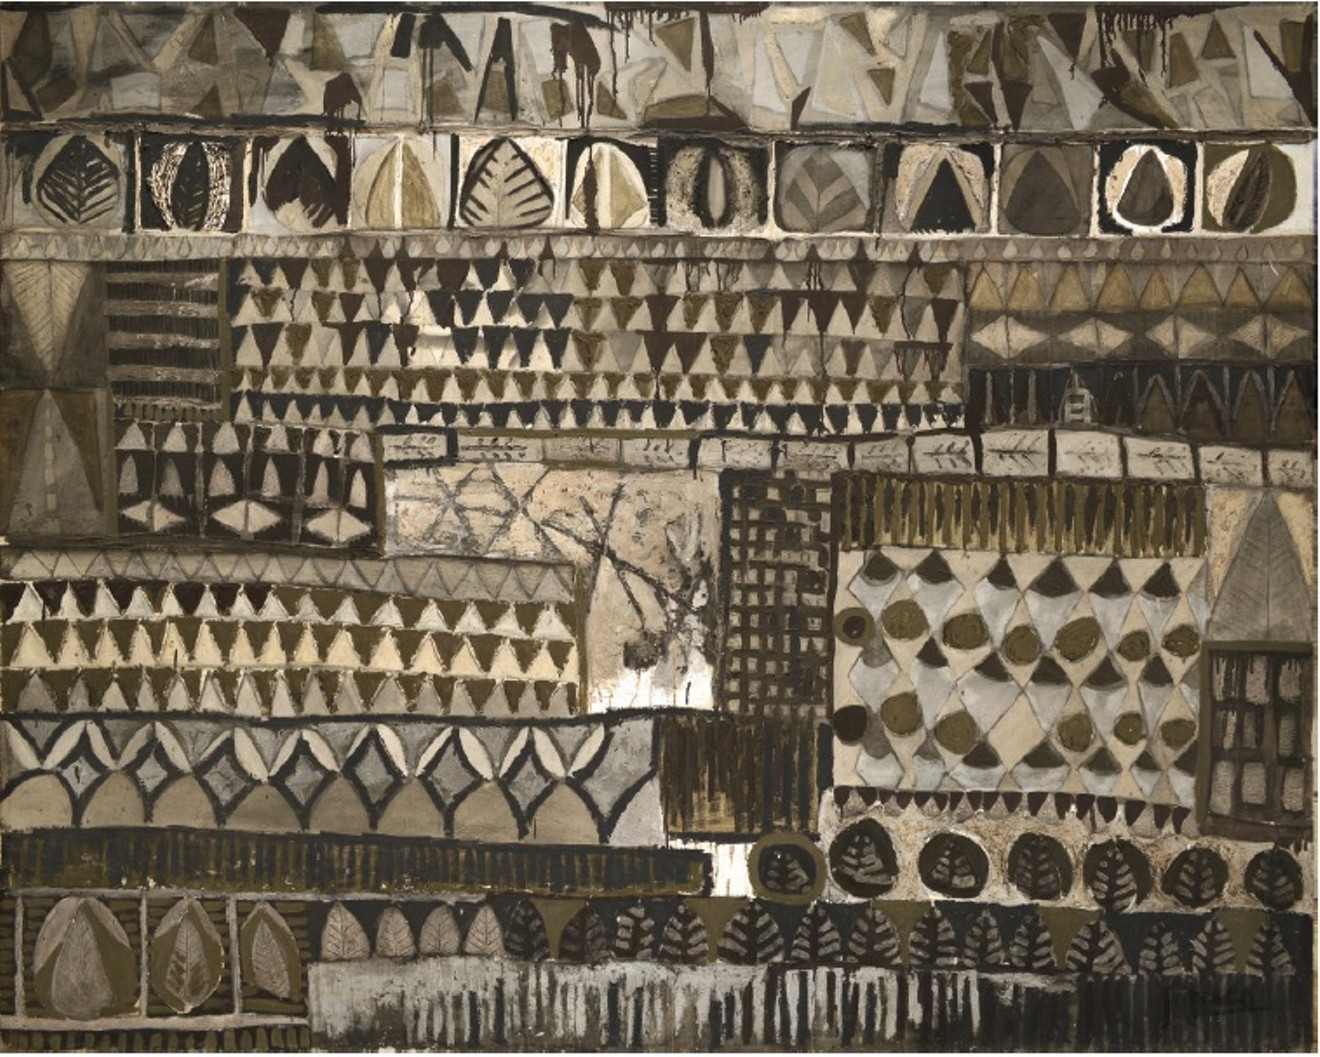 Landscape I (1995), with its network of lean gray strokes, uses mixed media on canvas.